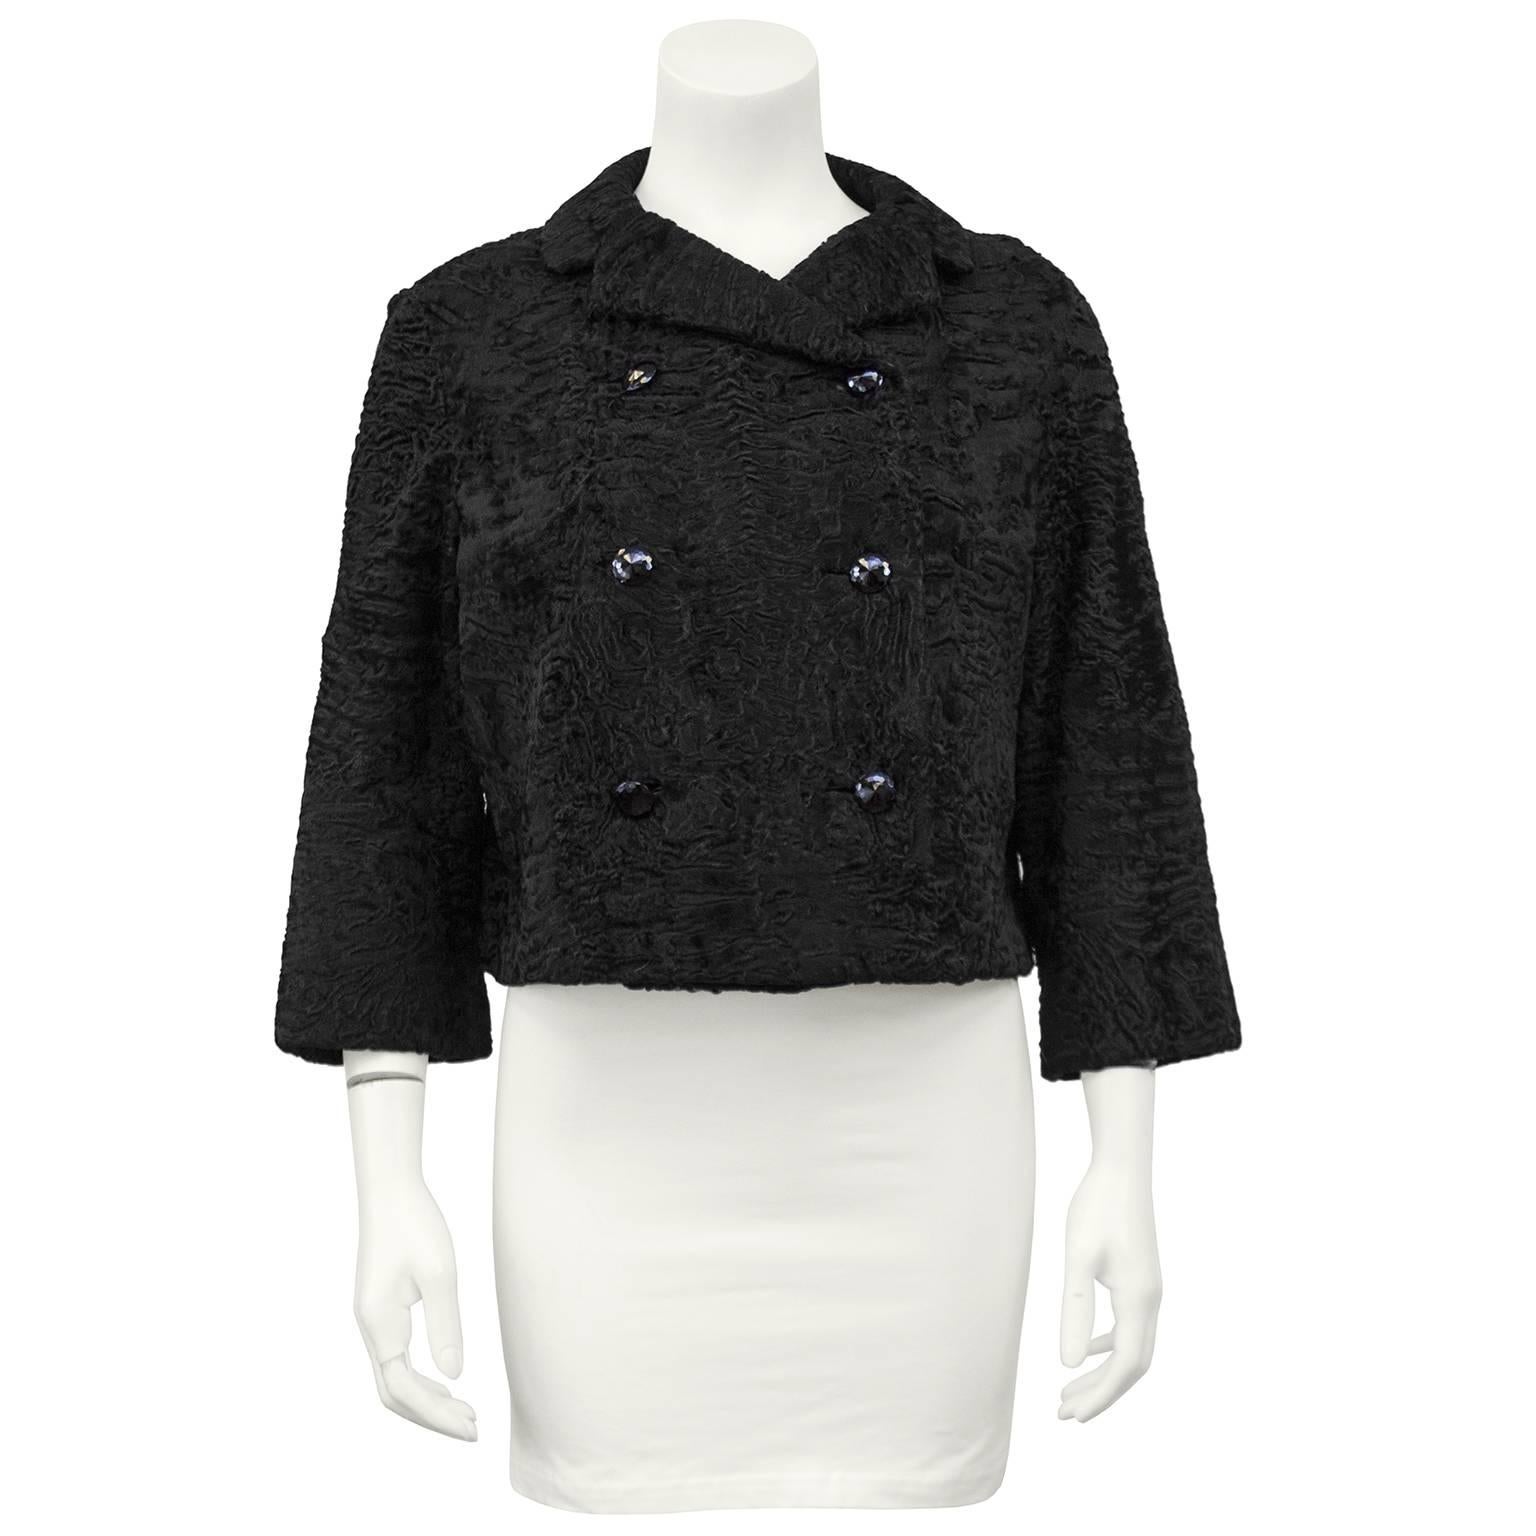 Christian Dior Original for Holt Renfrew label black broadtail cropped jacket is amazing and in immaculate condition. The adorable jacket does up the front, double breasted style, with black faceted plastic buttons. Lined in black silk and